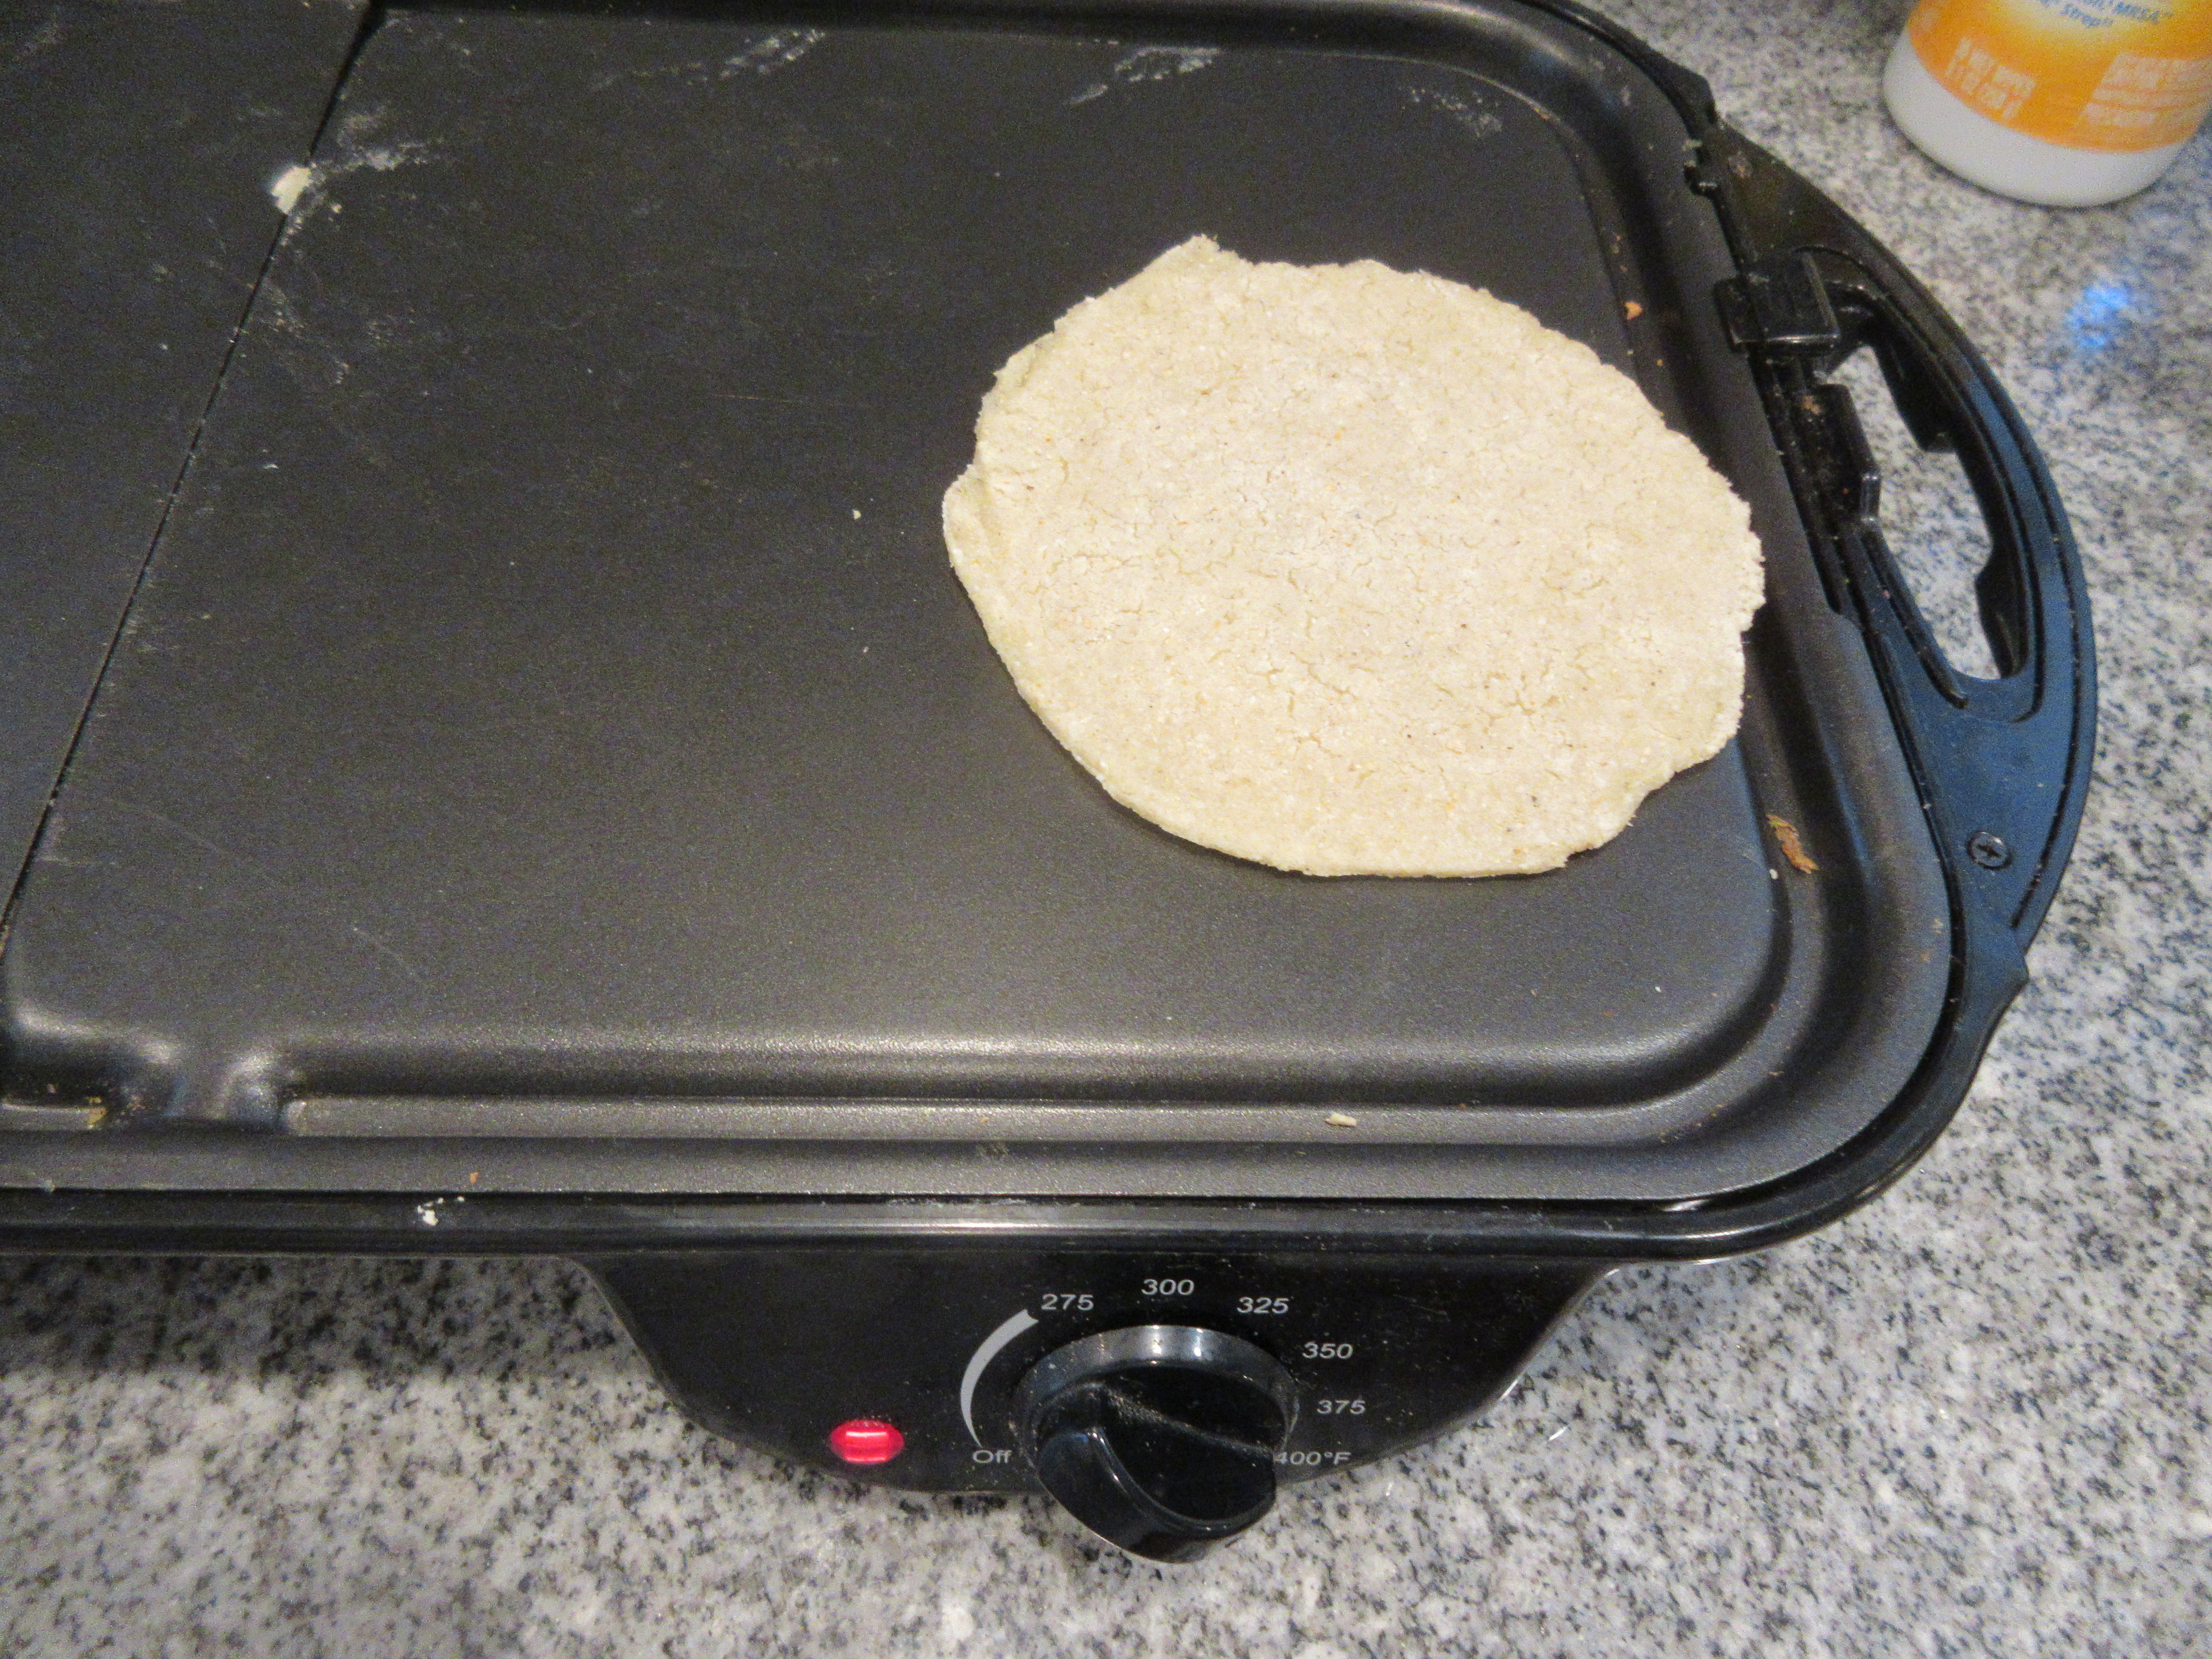 https://upload.wikimedia.org/wikipedia/commons/d/d4/Tortilla_cooking_on_an_electric_griddle_02.jpg